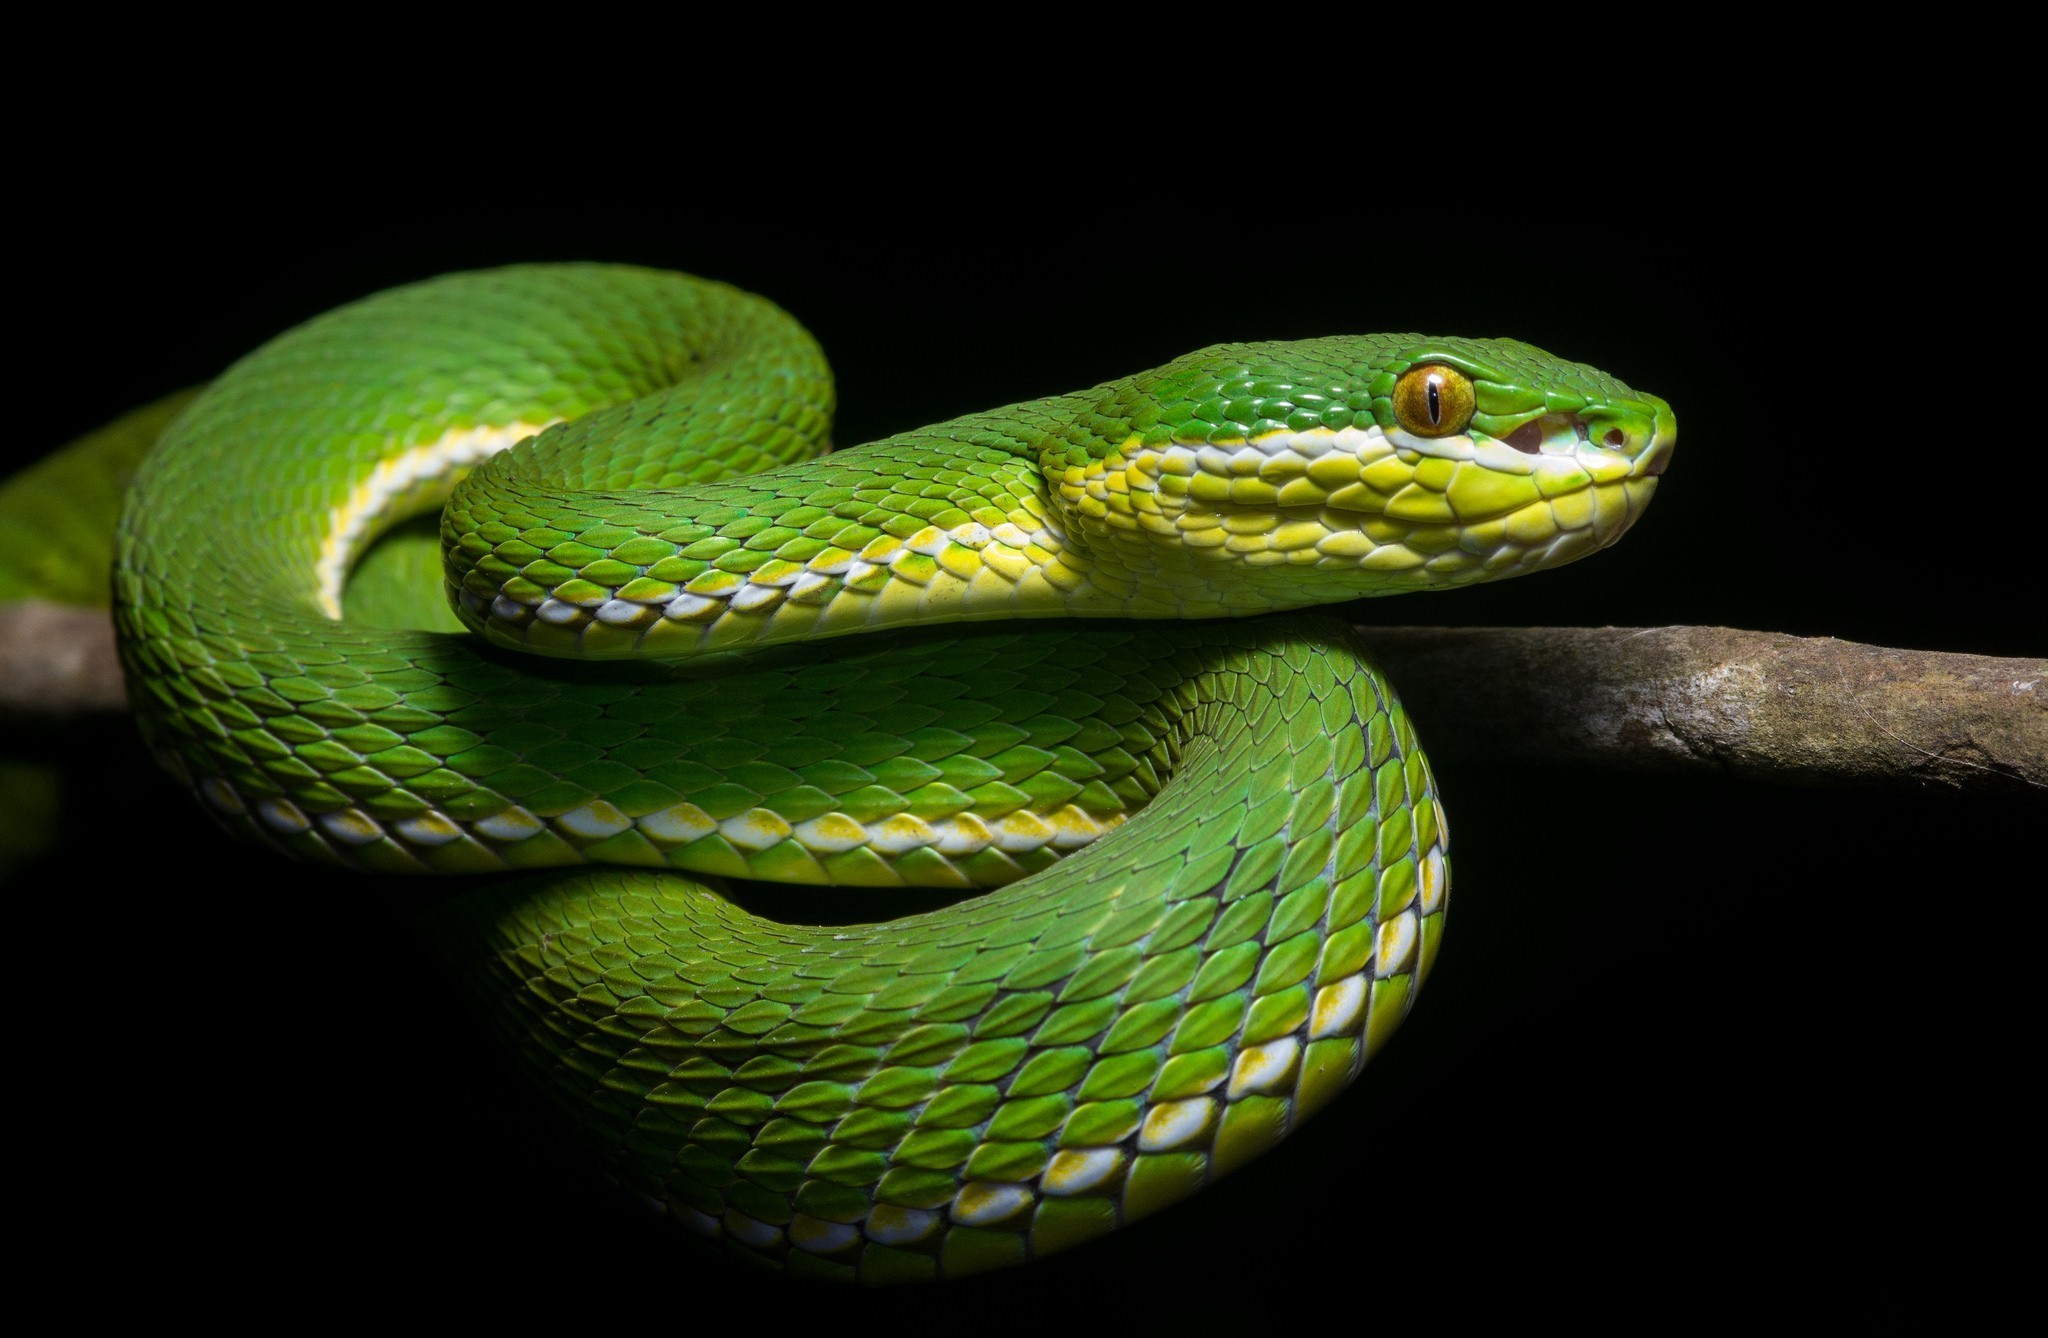 General 2048x1338 reptiles snake animals black background simple background closeup